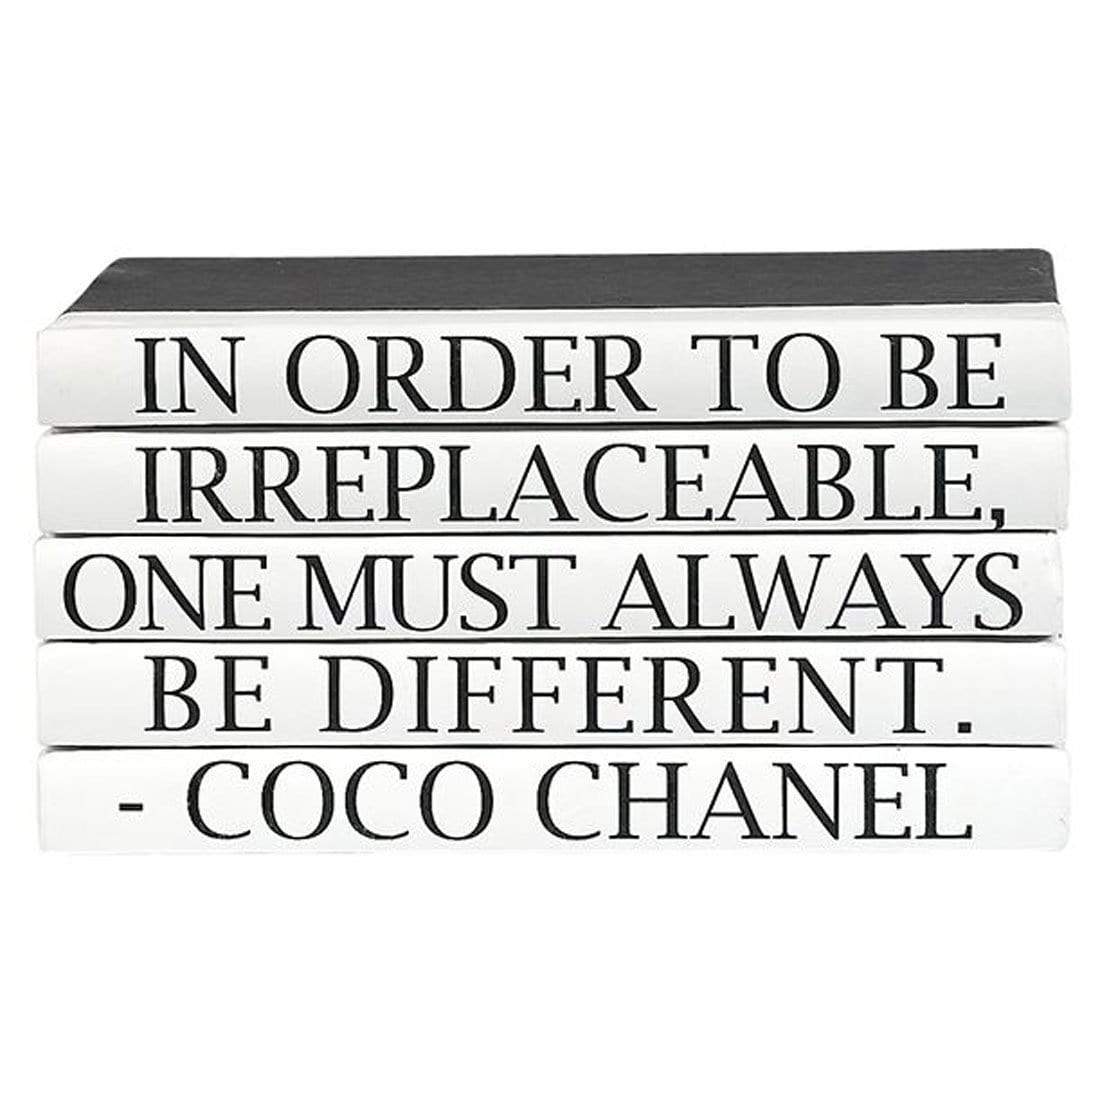 coco chanel book biography